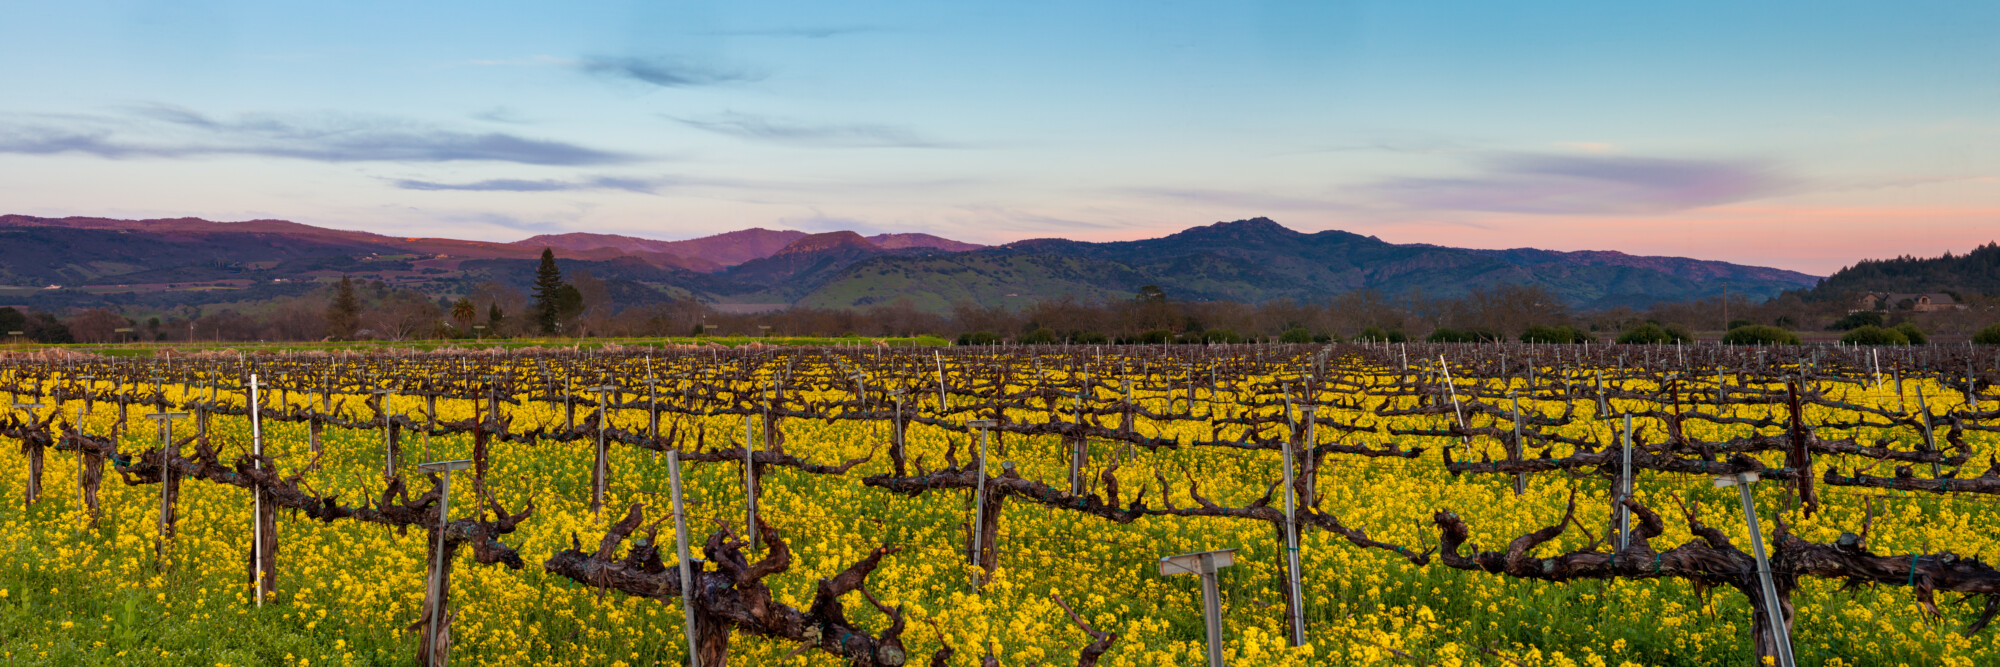 Napa Valley wine country panorama at sunset in winter